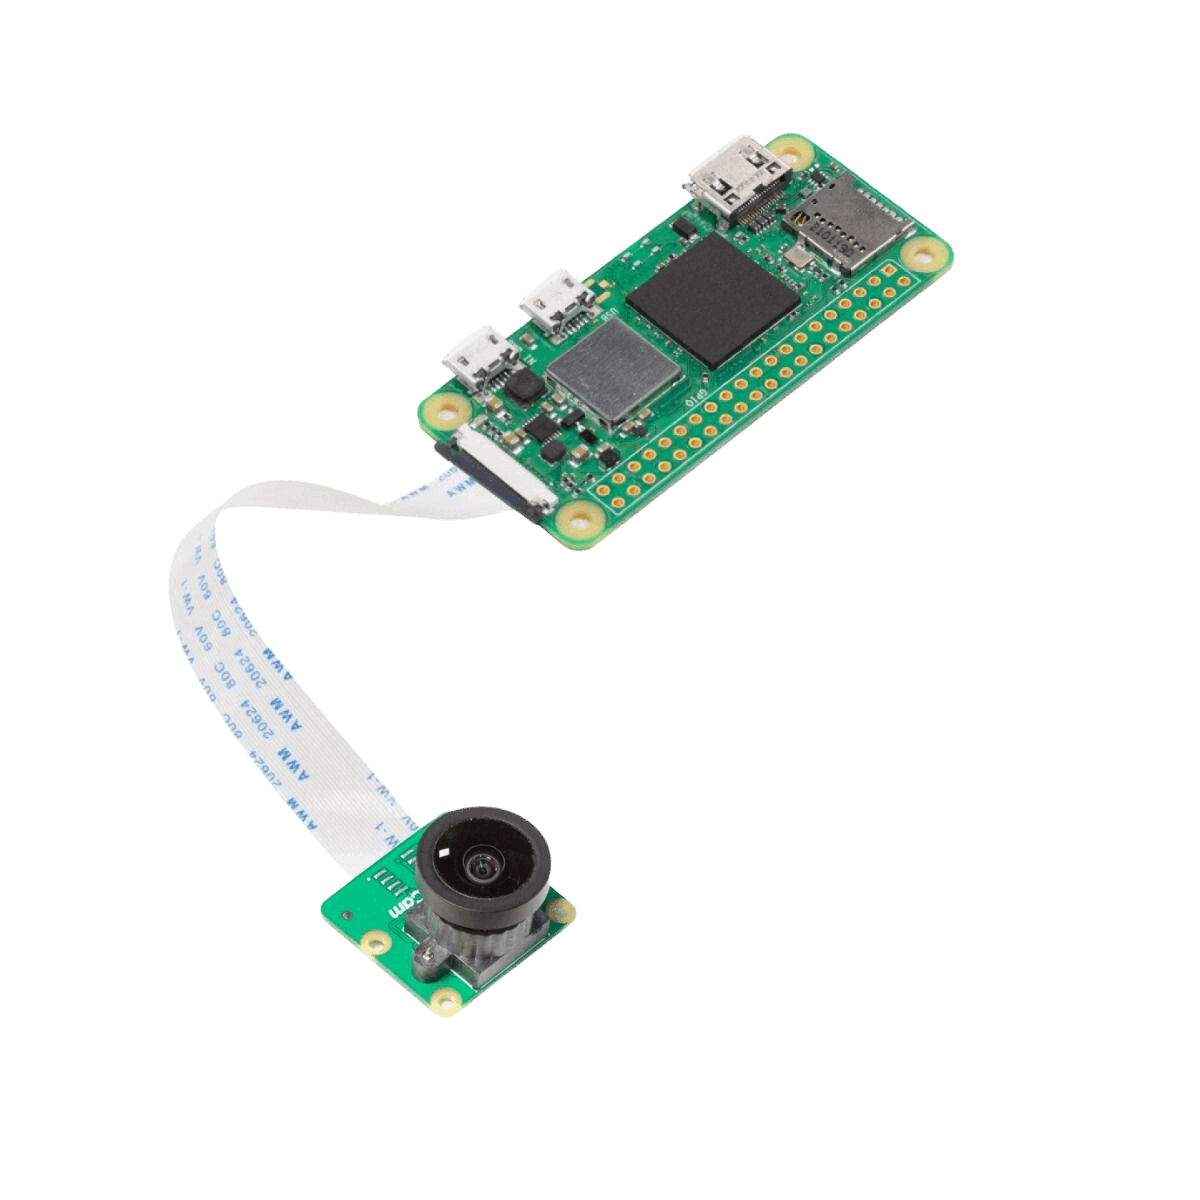 B0310 camera module connected to a raspberry pi pico